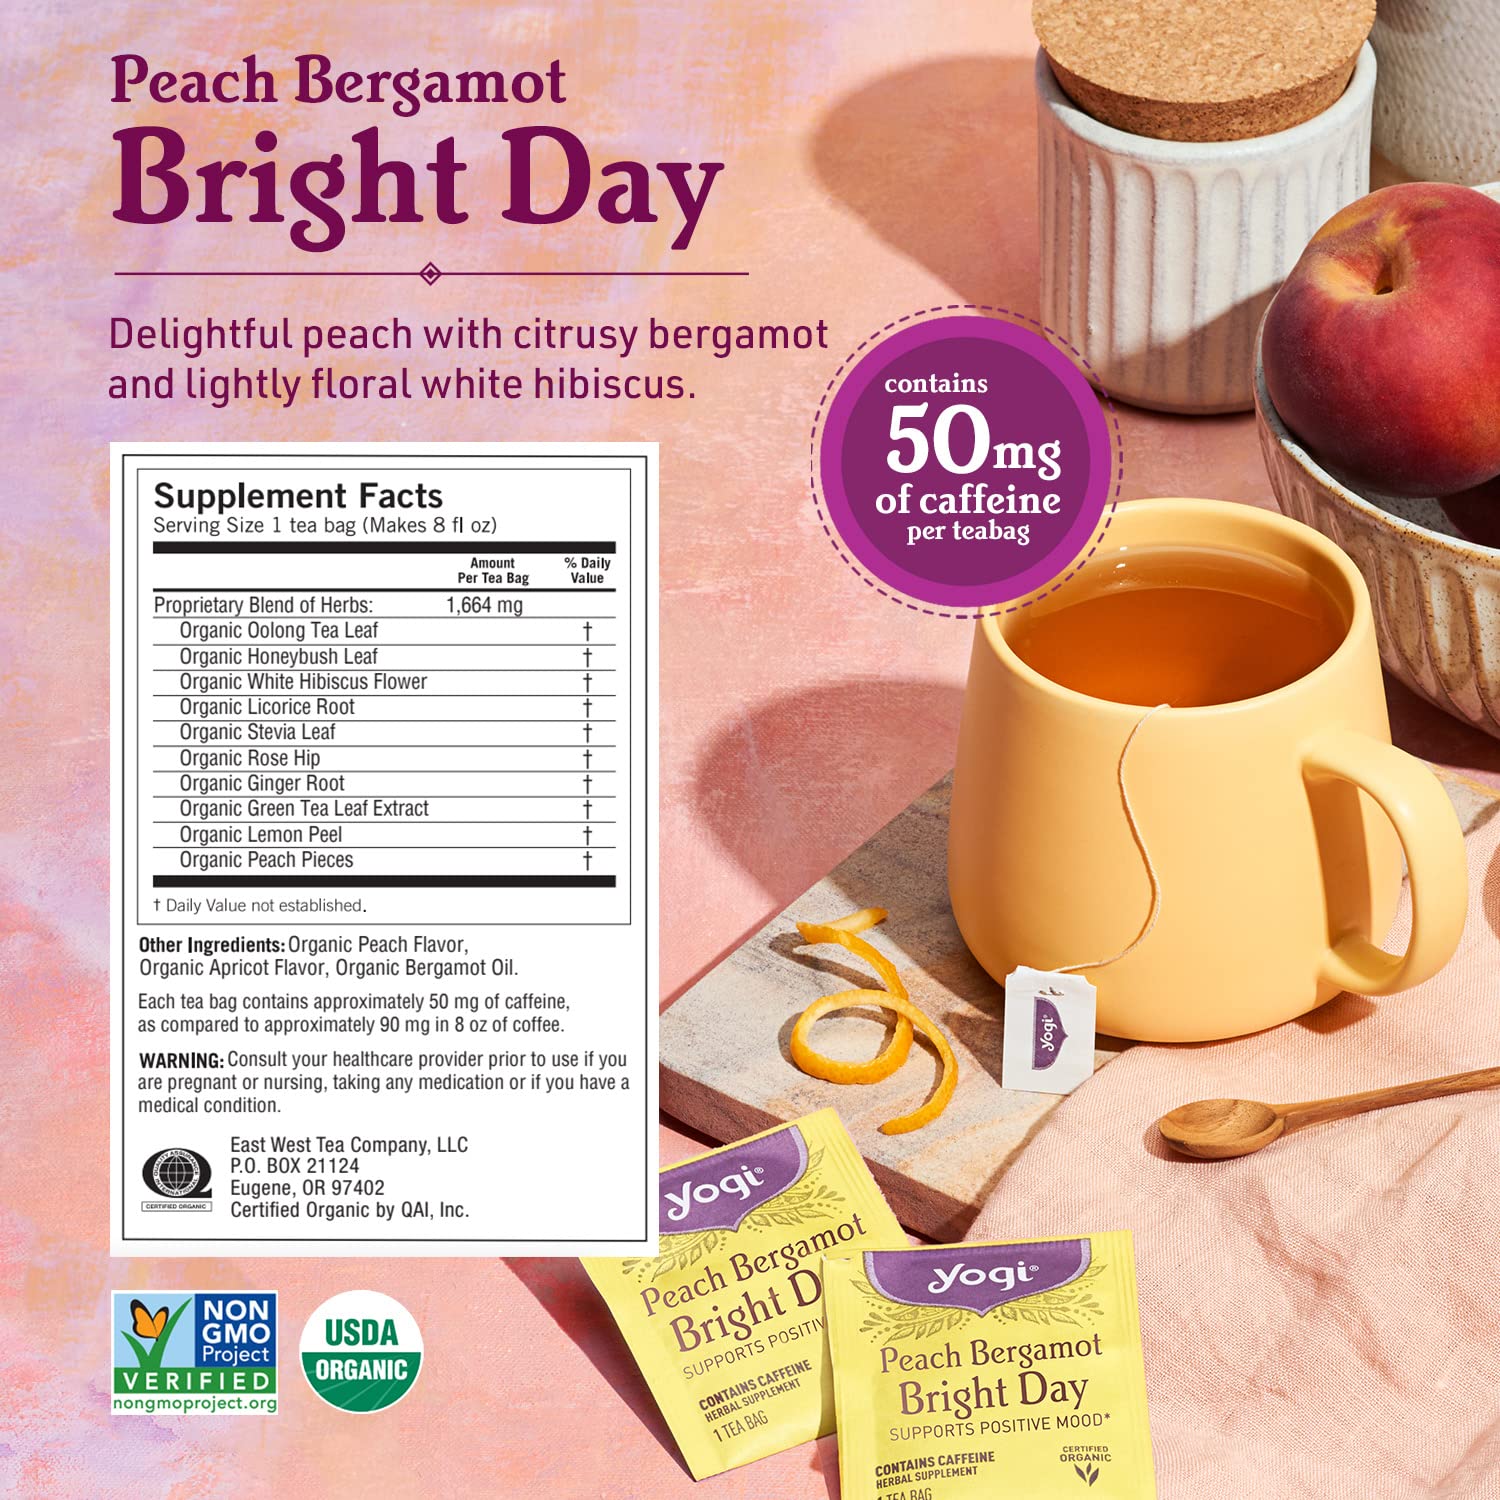 Yogi Tea - Morning Energy Variety Pack (3 Pack) Includes Peach Bergamot Bright Day, Rich and Robust Morning Vitality, Spiced Blackberry Focus - 48 Organic Tea Bags